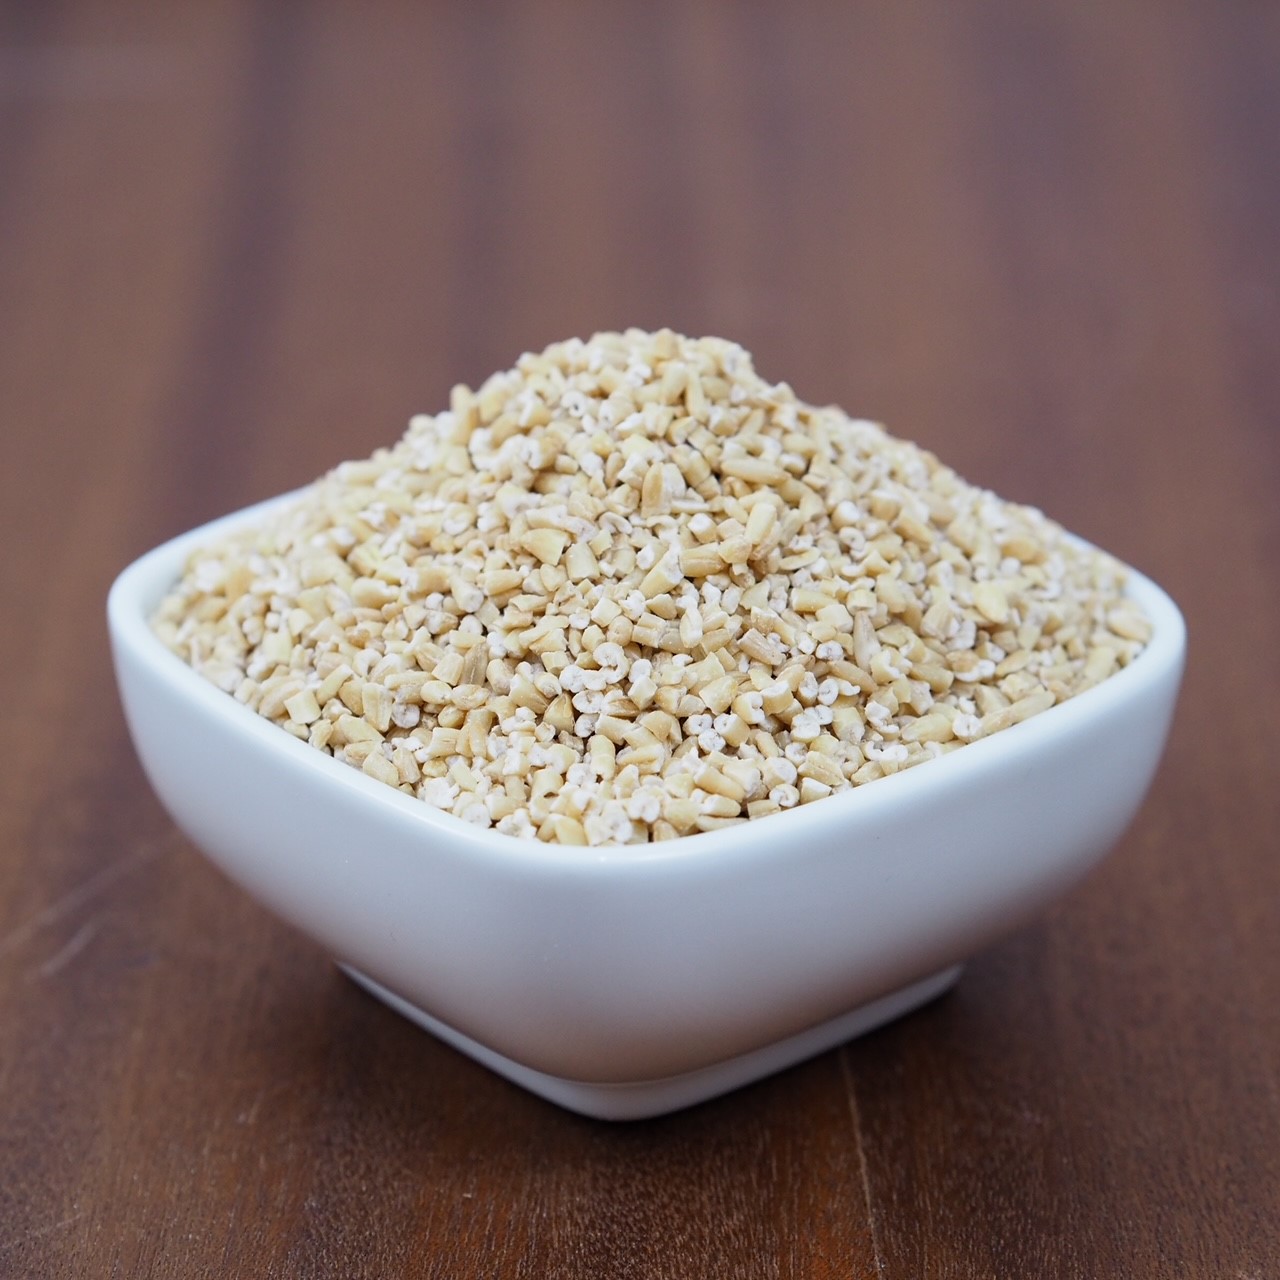 How To Store Steel Cut Oats